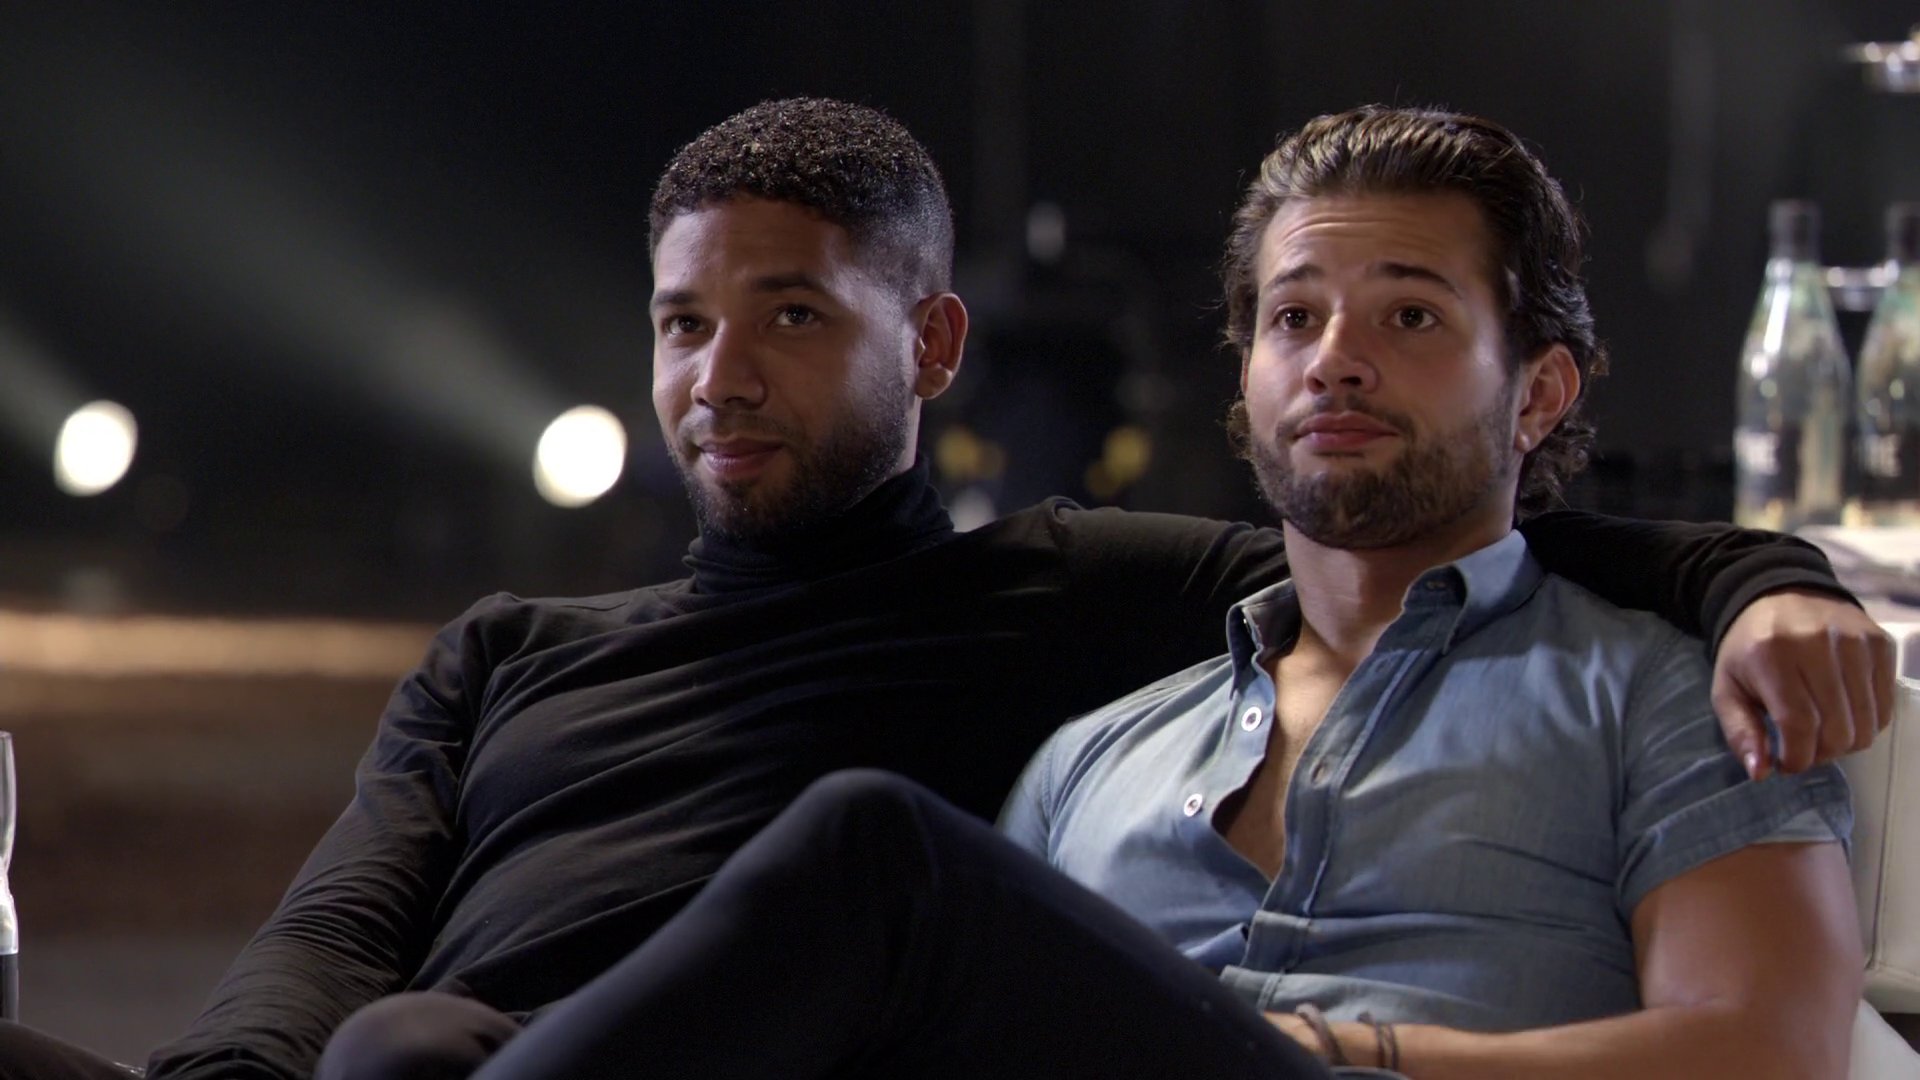 Are Micheal and Jamal going to reunite? Are we ready #Team Jamal?